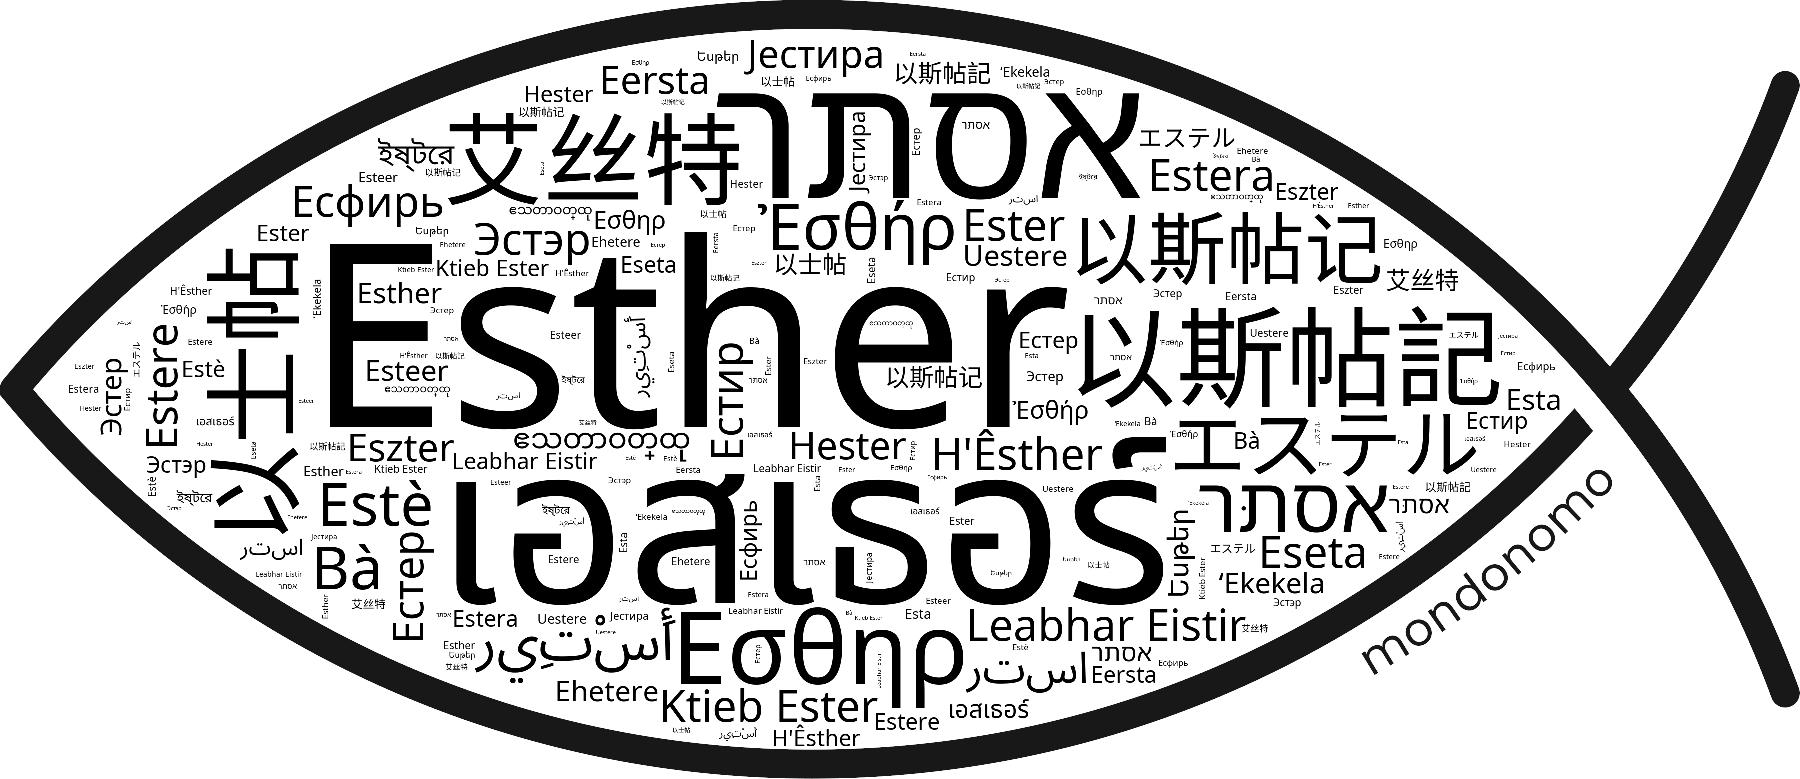 Name Esther in the world's Bibles